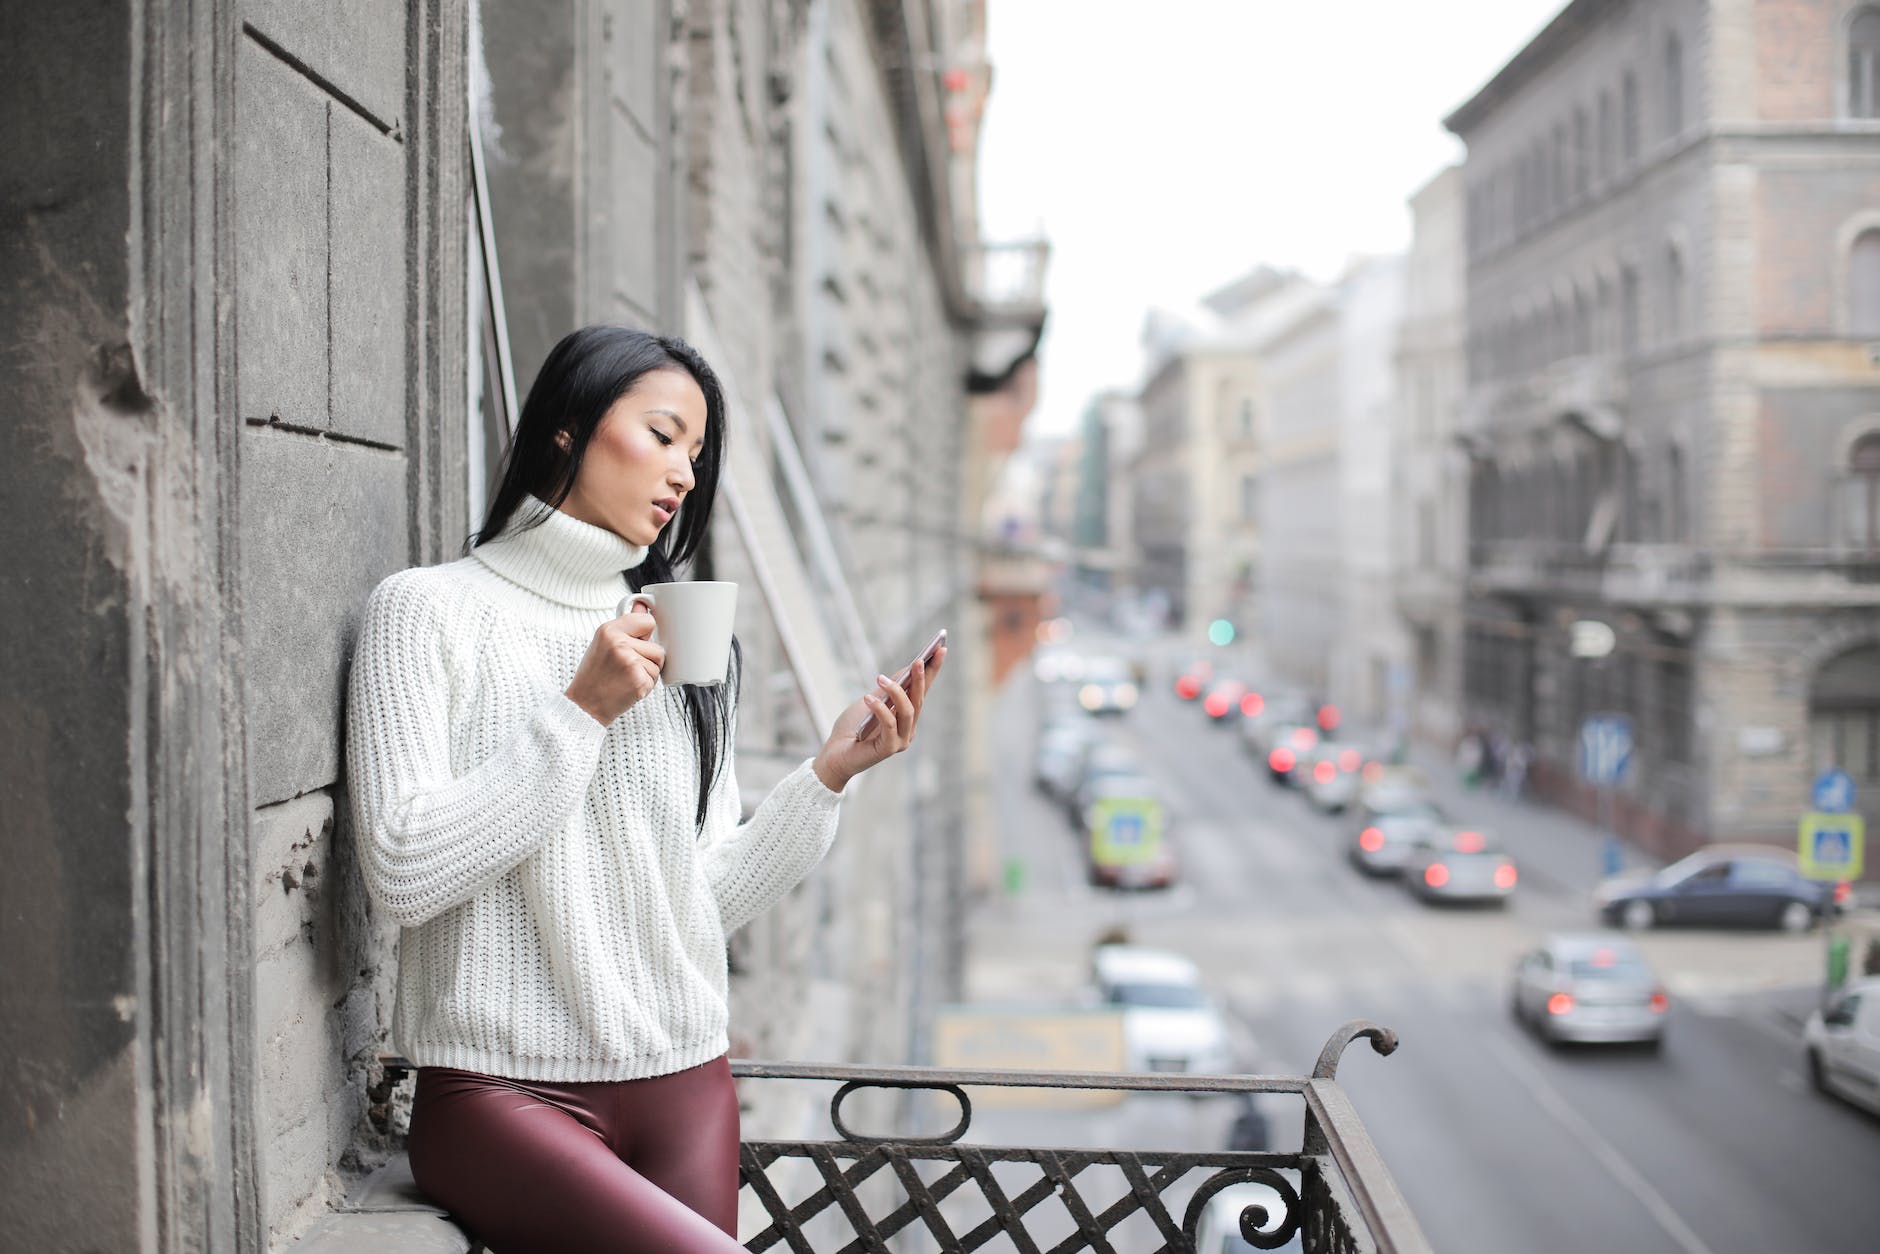 A woman is on the balcony. She has straight hair and is wearing a white pullover with turtle neck. She is also wearing purple trousers and is holding a cup of coffee. She is checking something in her cellphone.